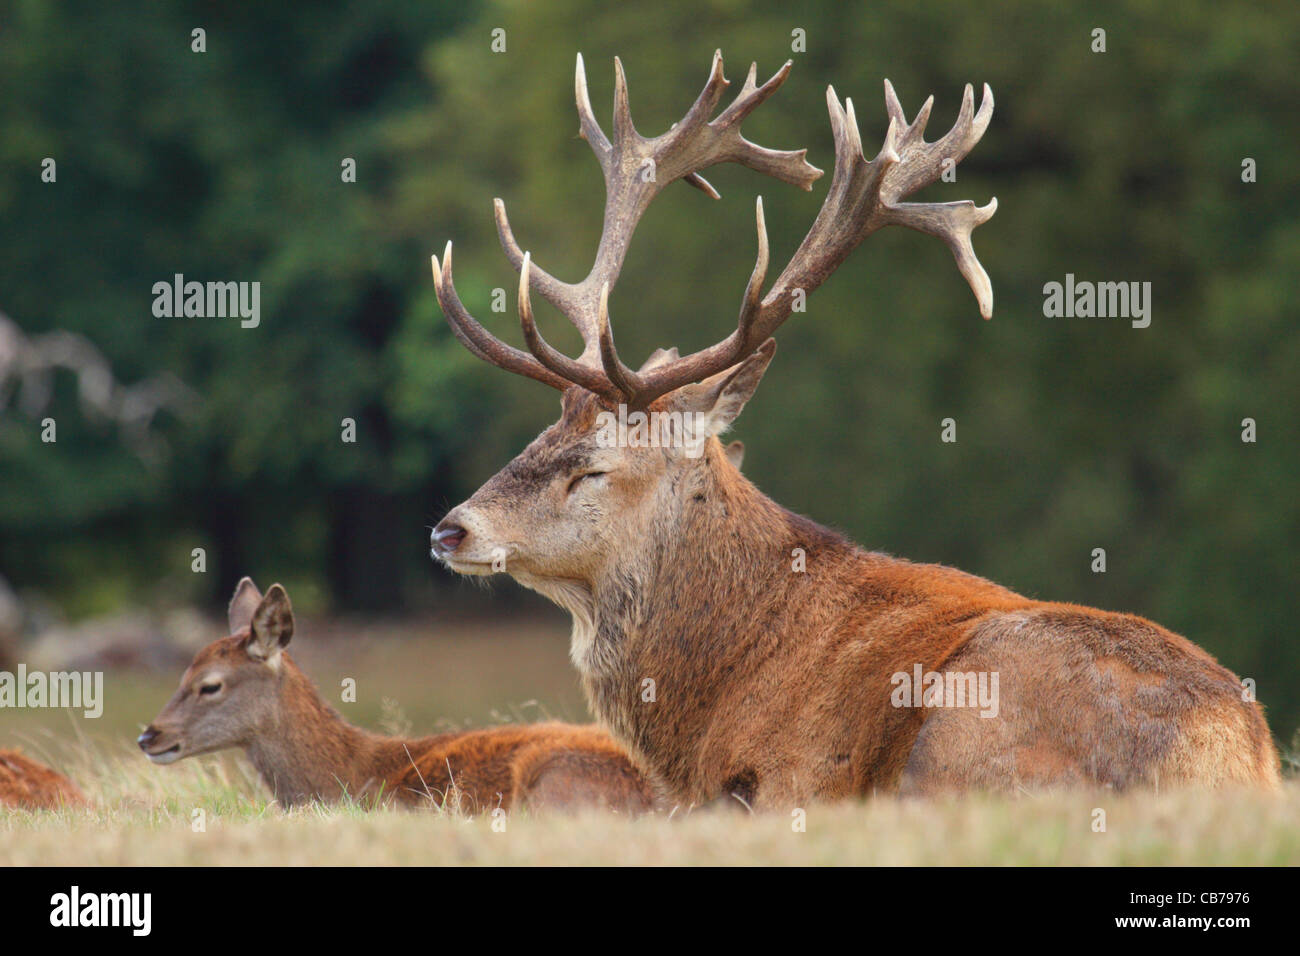 Red stag deer dozing in grass next to calf Stock Photo